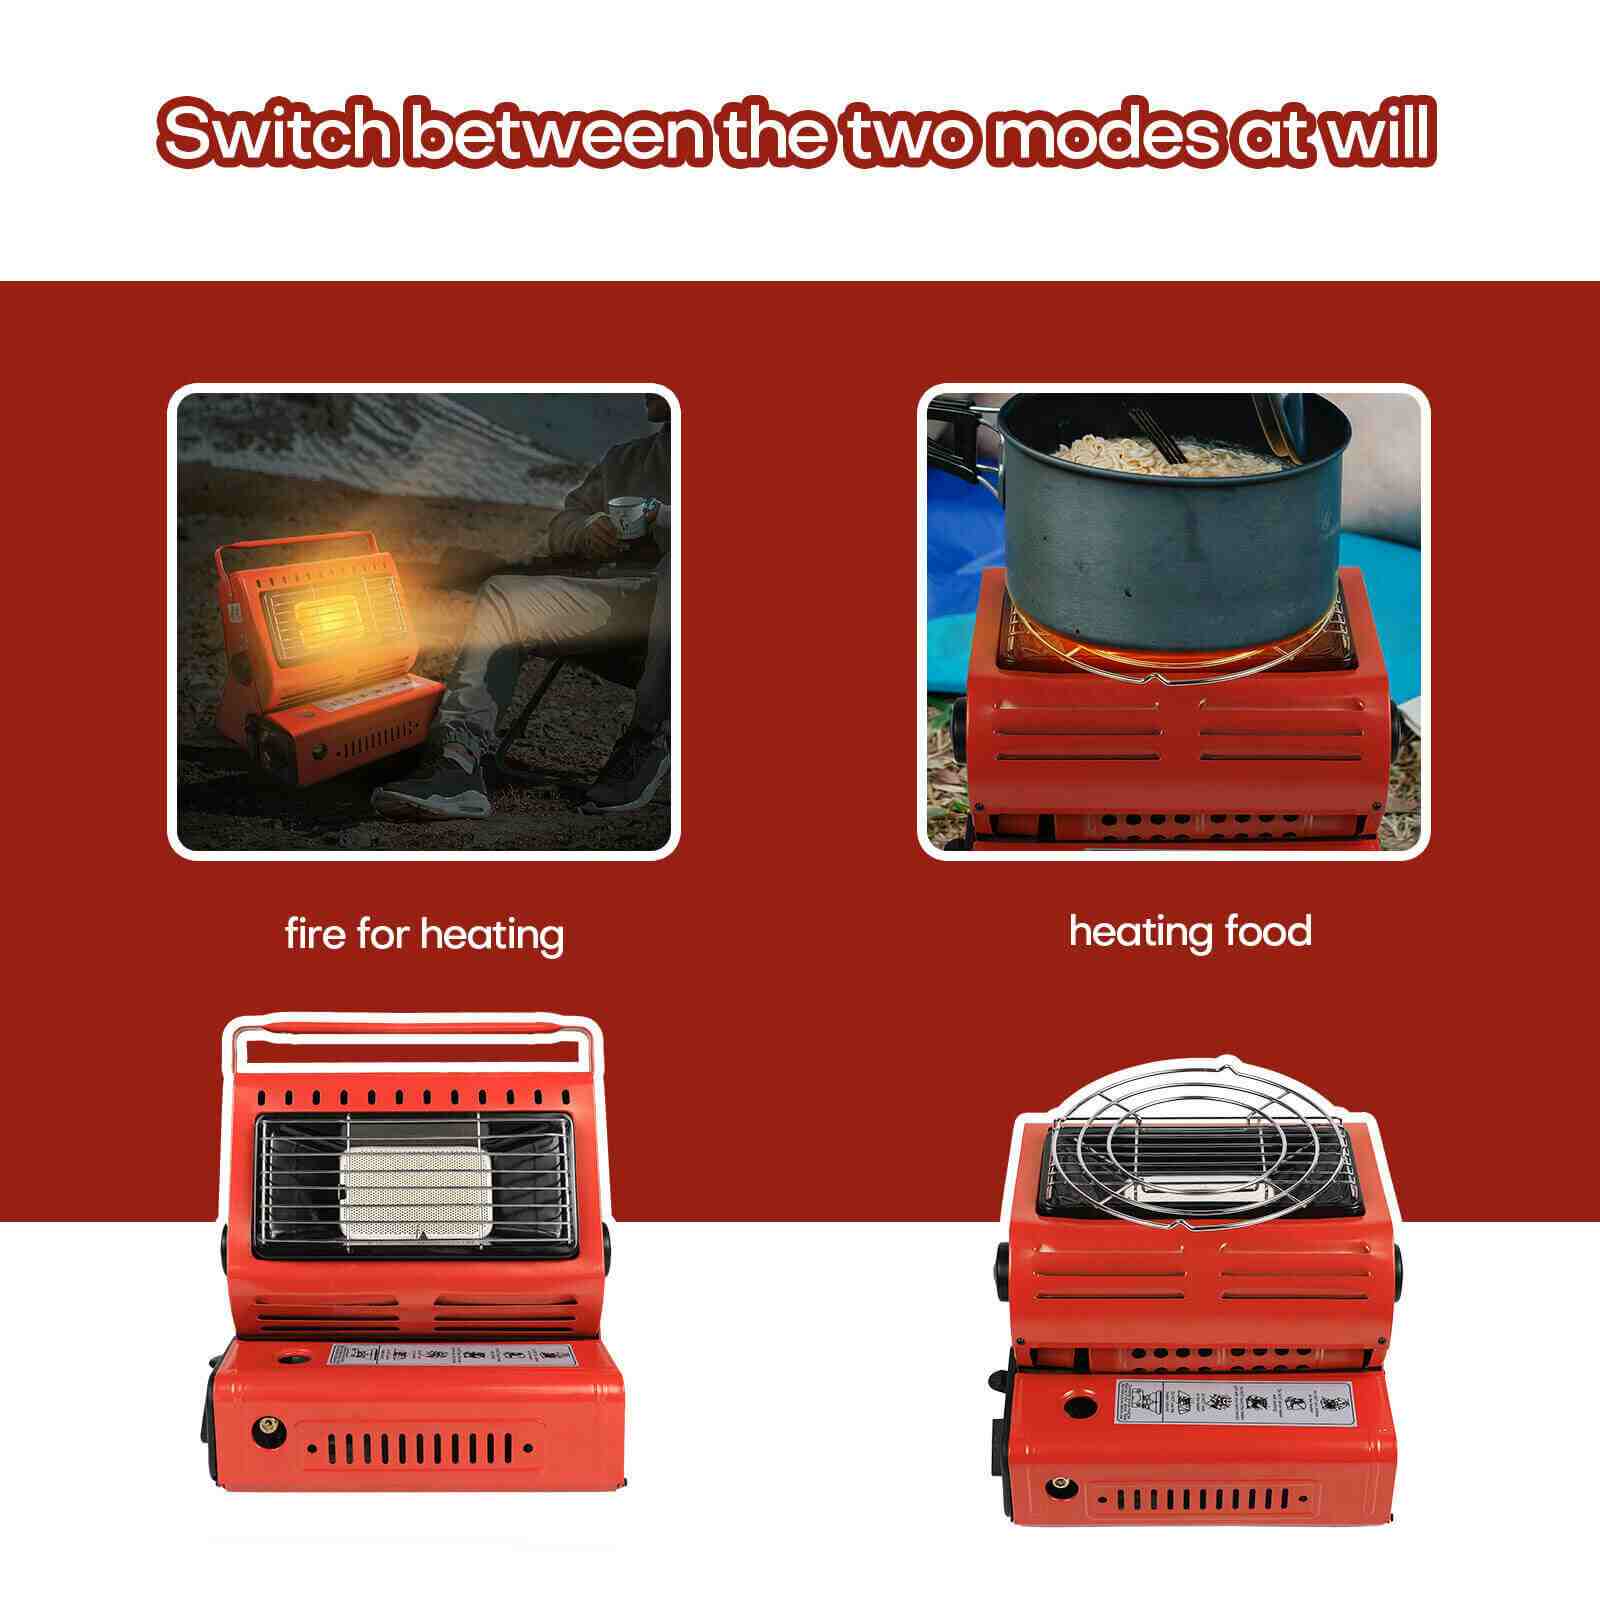 Design of Portable 2 in 1 GAS Butane Heater Camping Stove